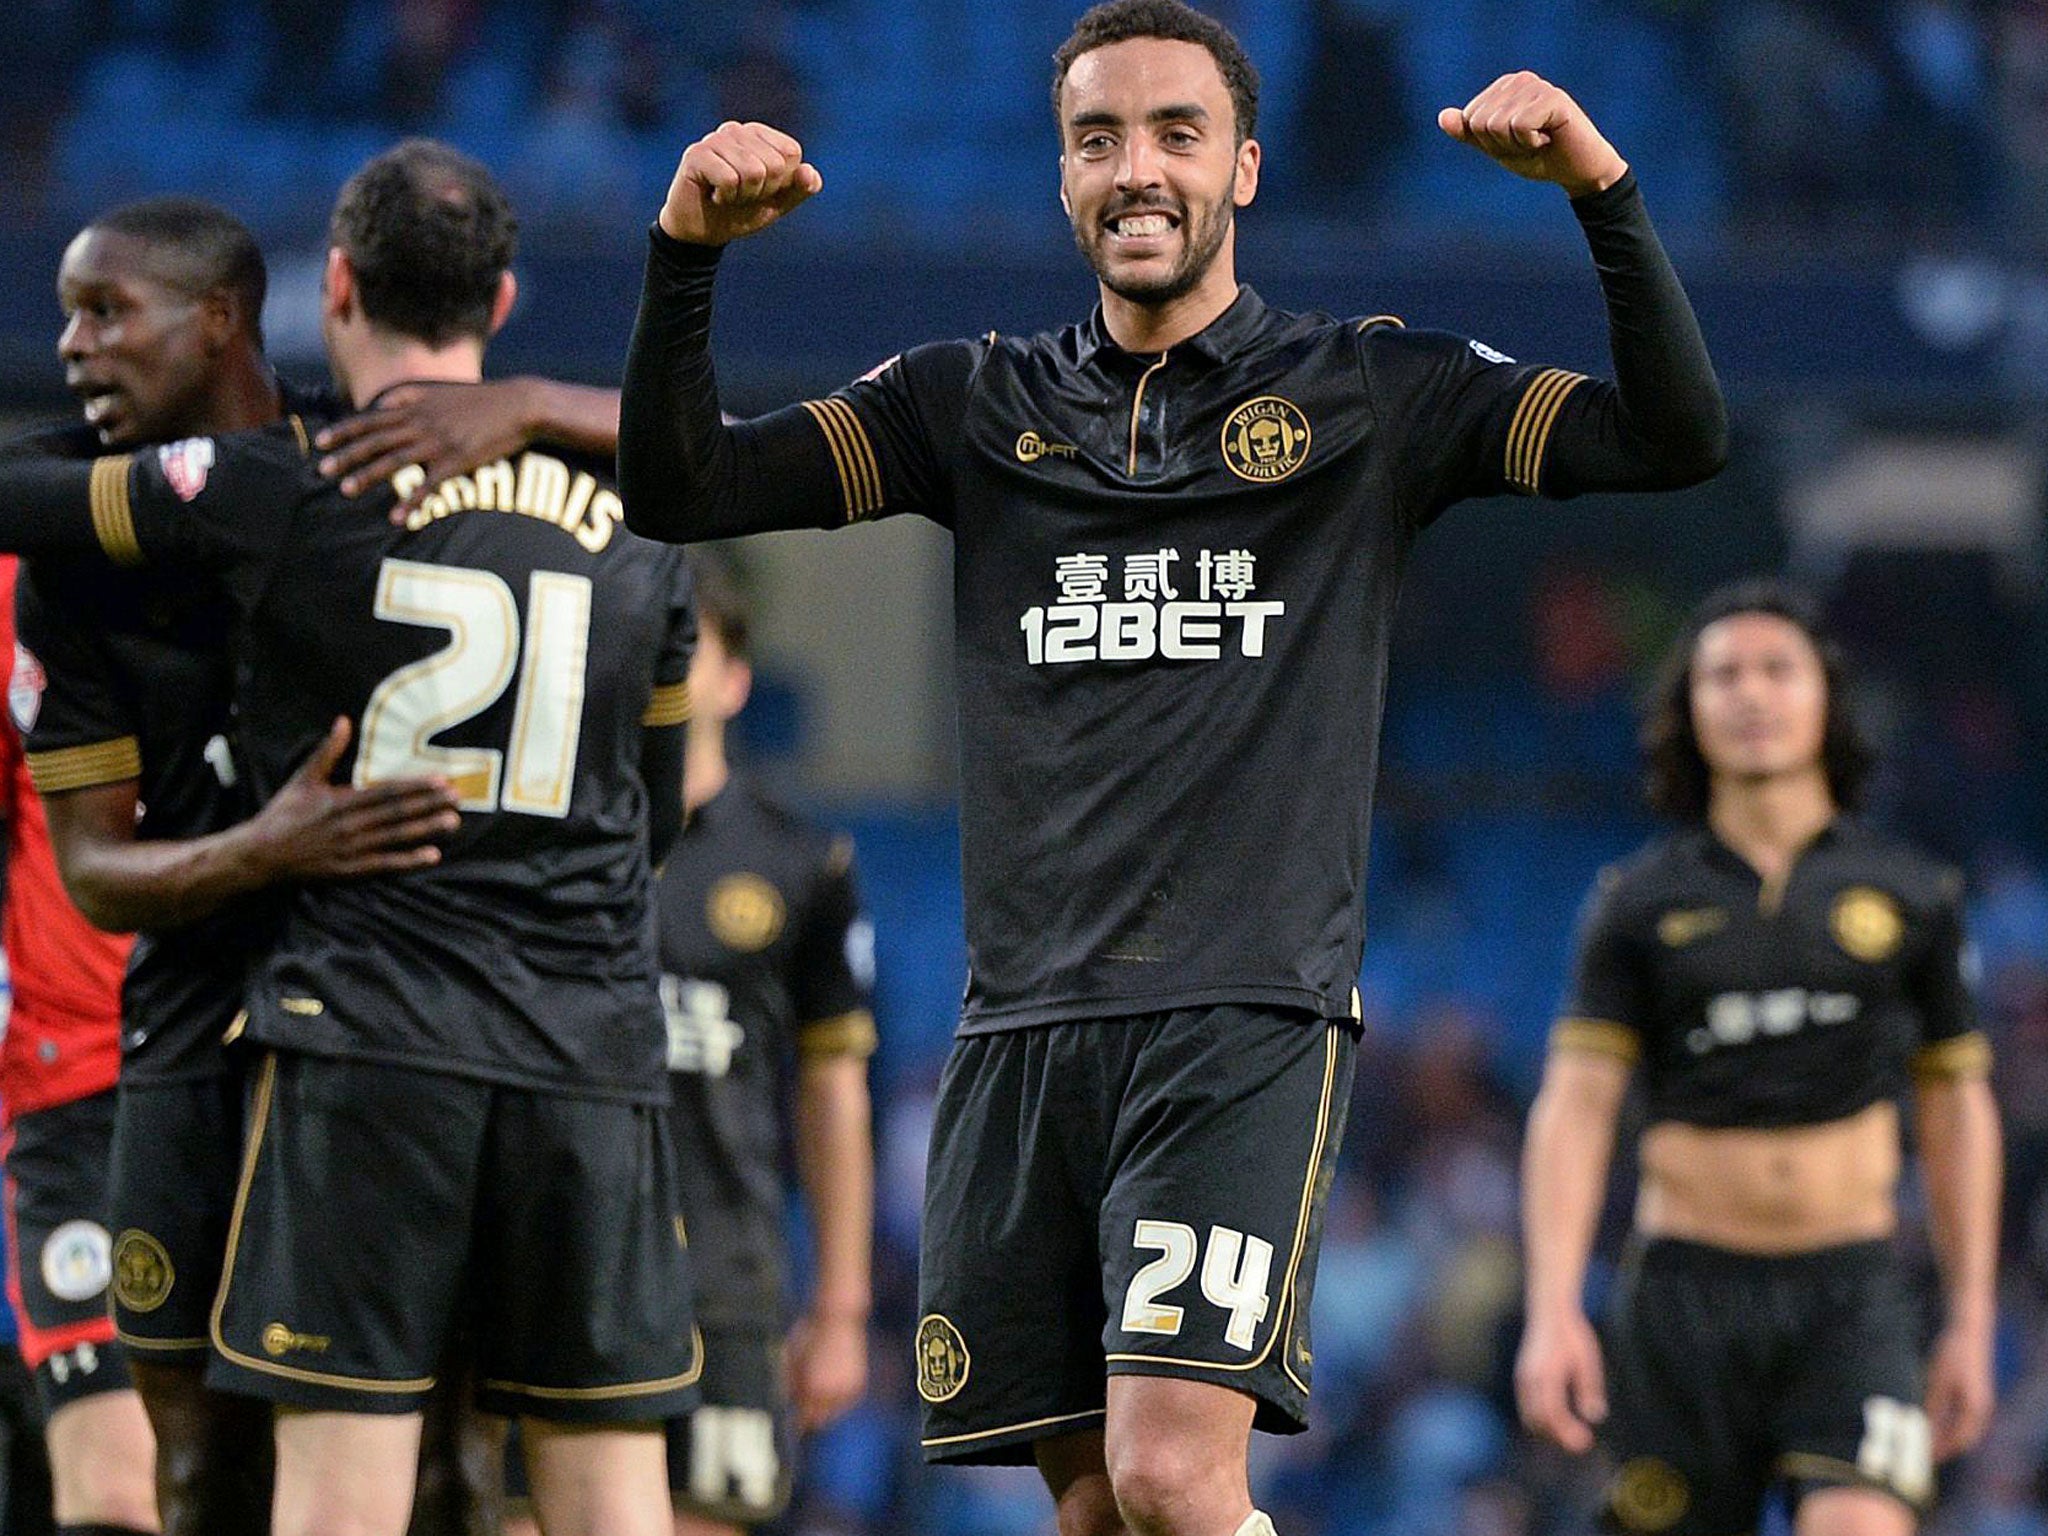 Wigan Athletic's James Perch celebrates at the final whistle after his goal helped knock Manchester City out of the FA Cup at the Etihad Stadium